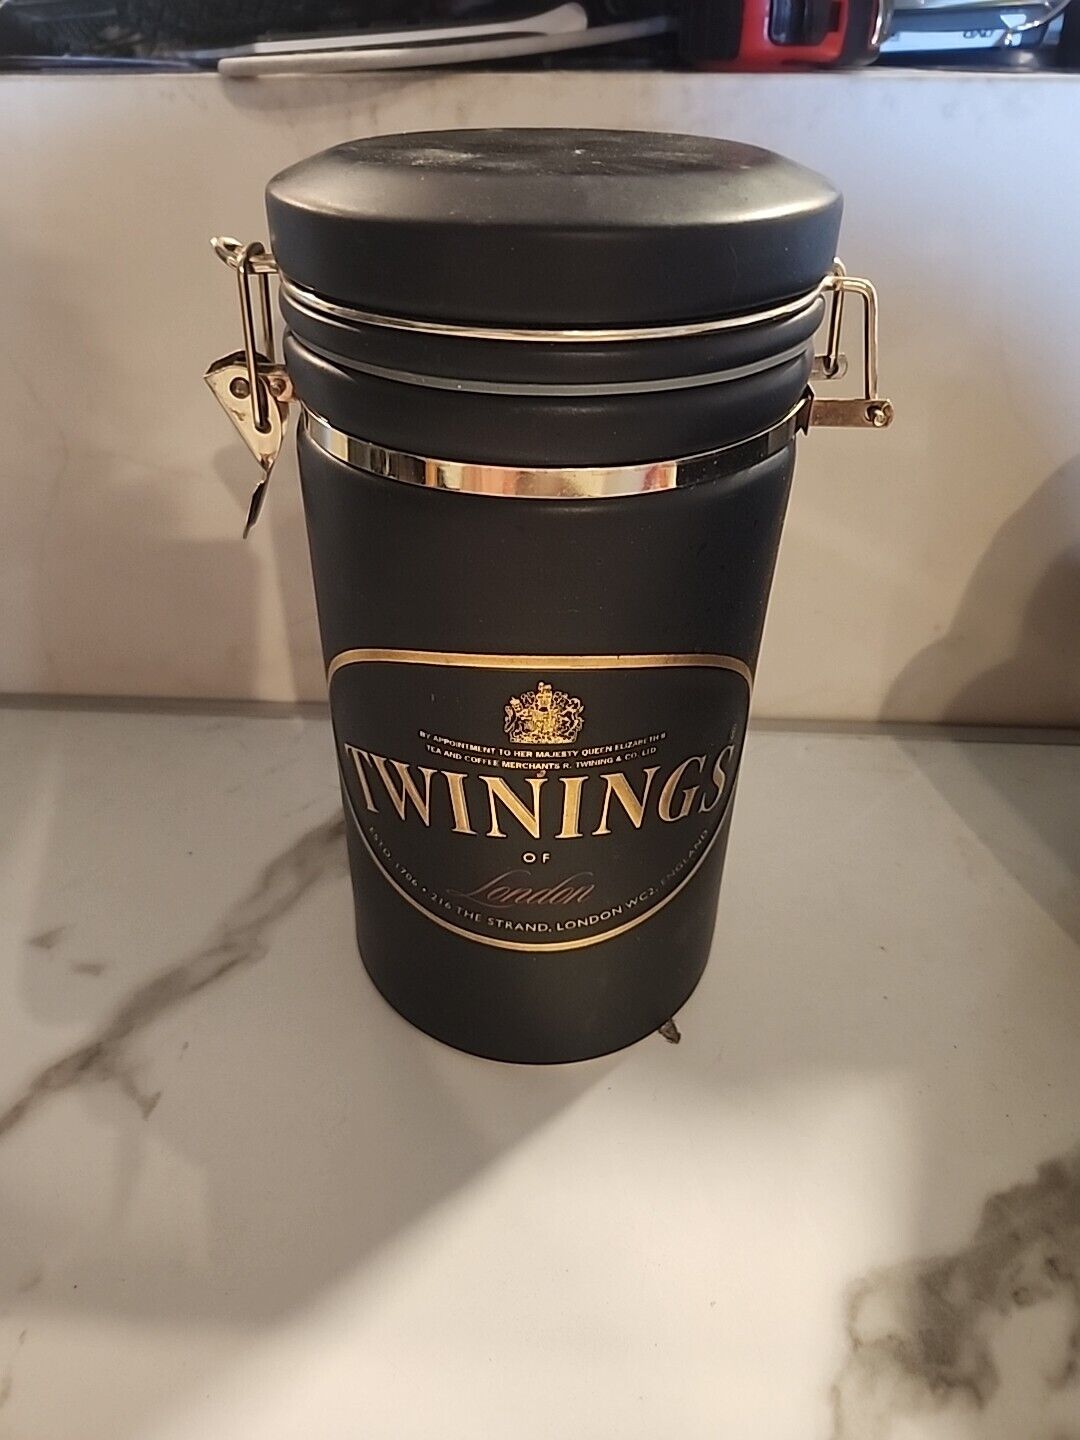 Twinings of London Black and Gold Ceramic Tea Canister